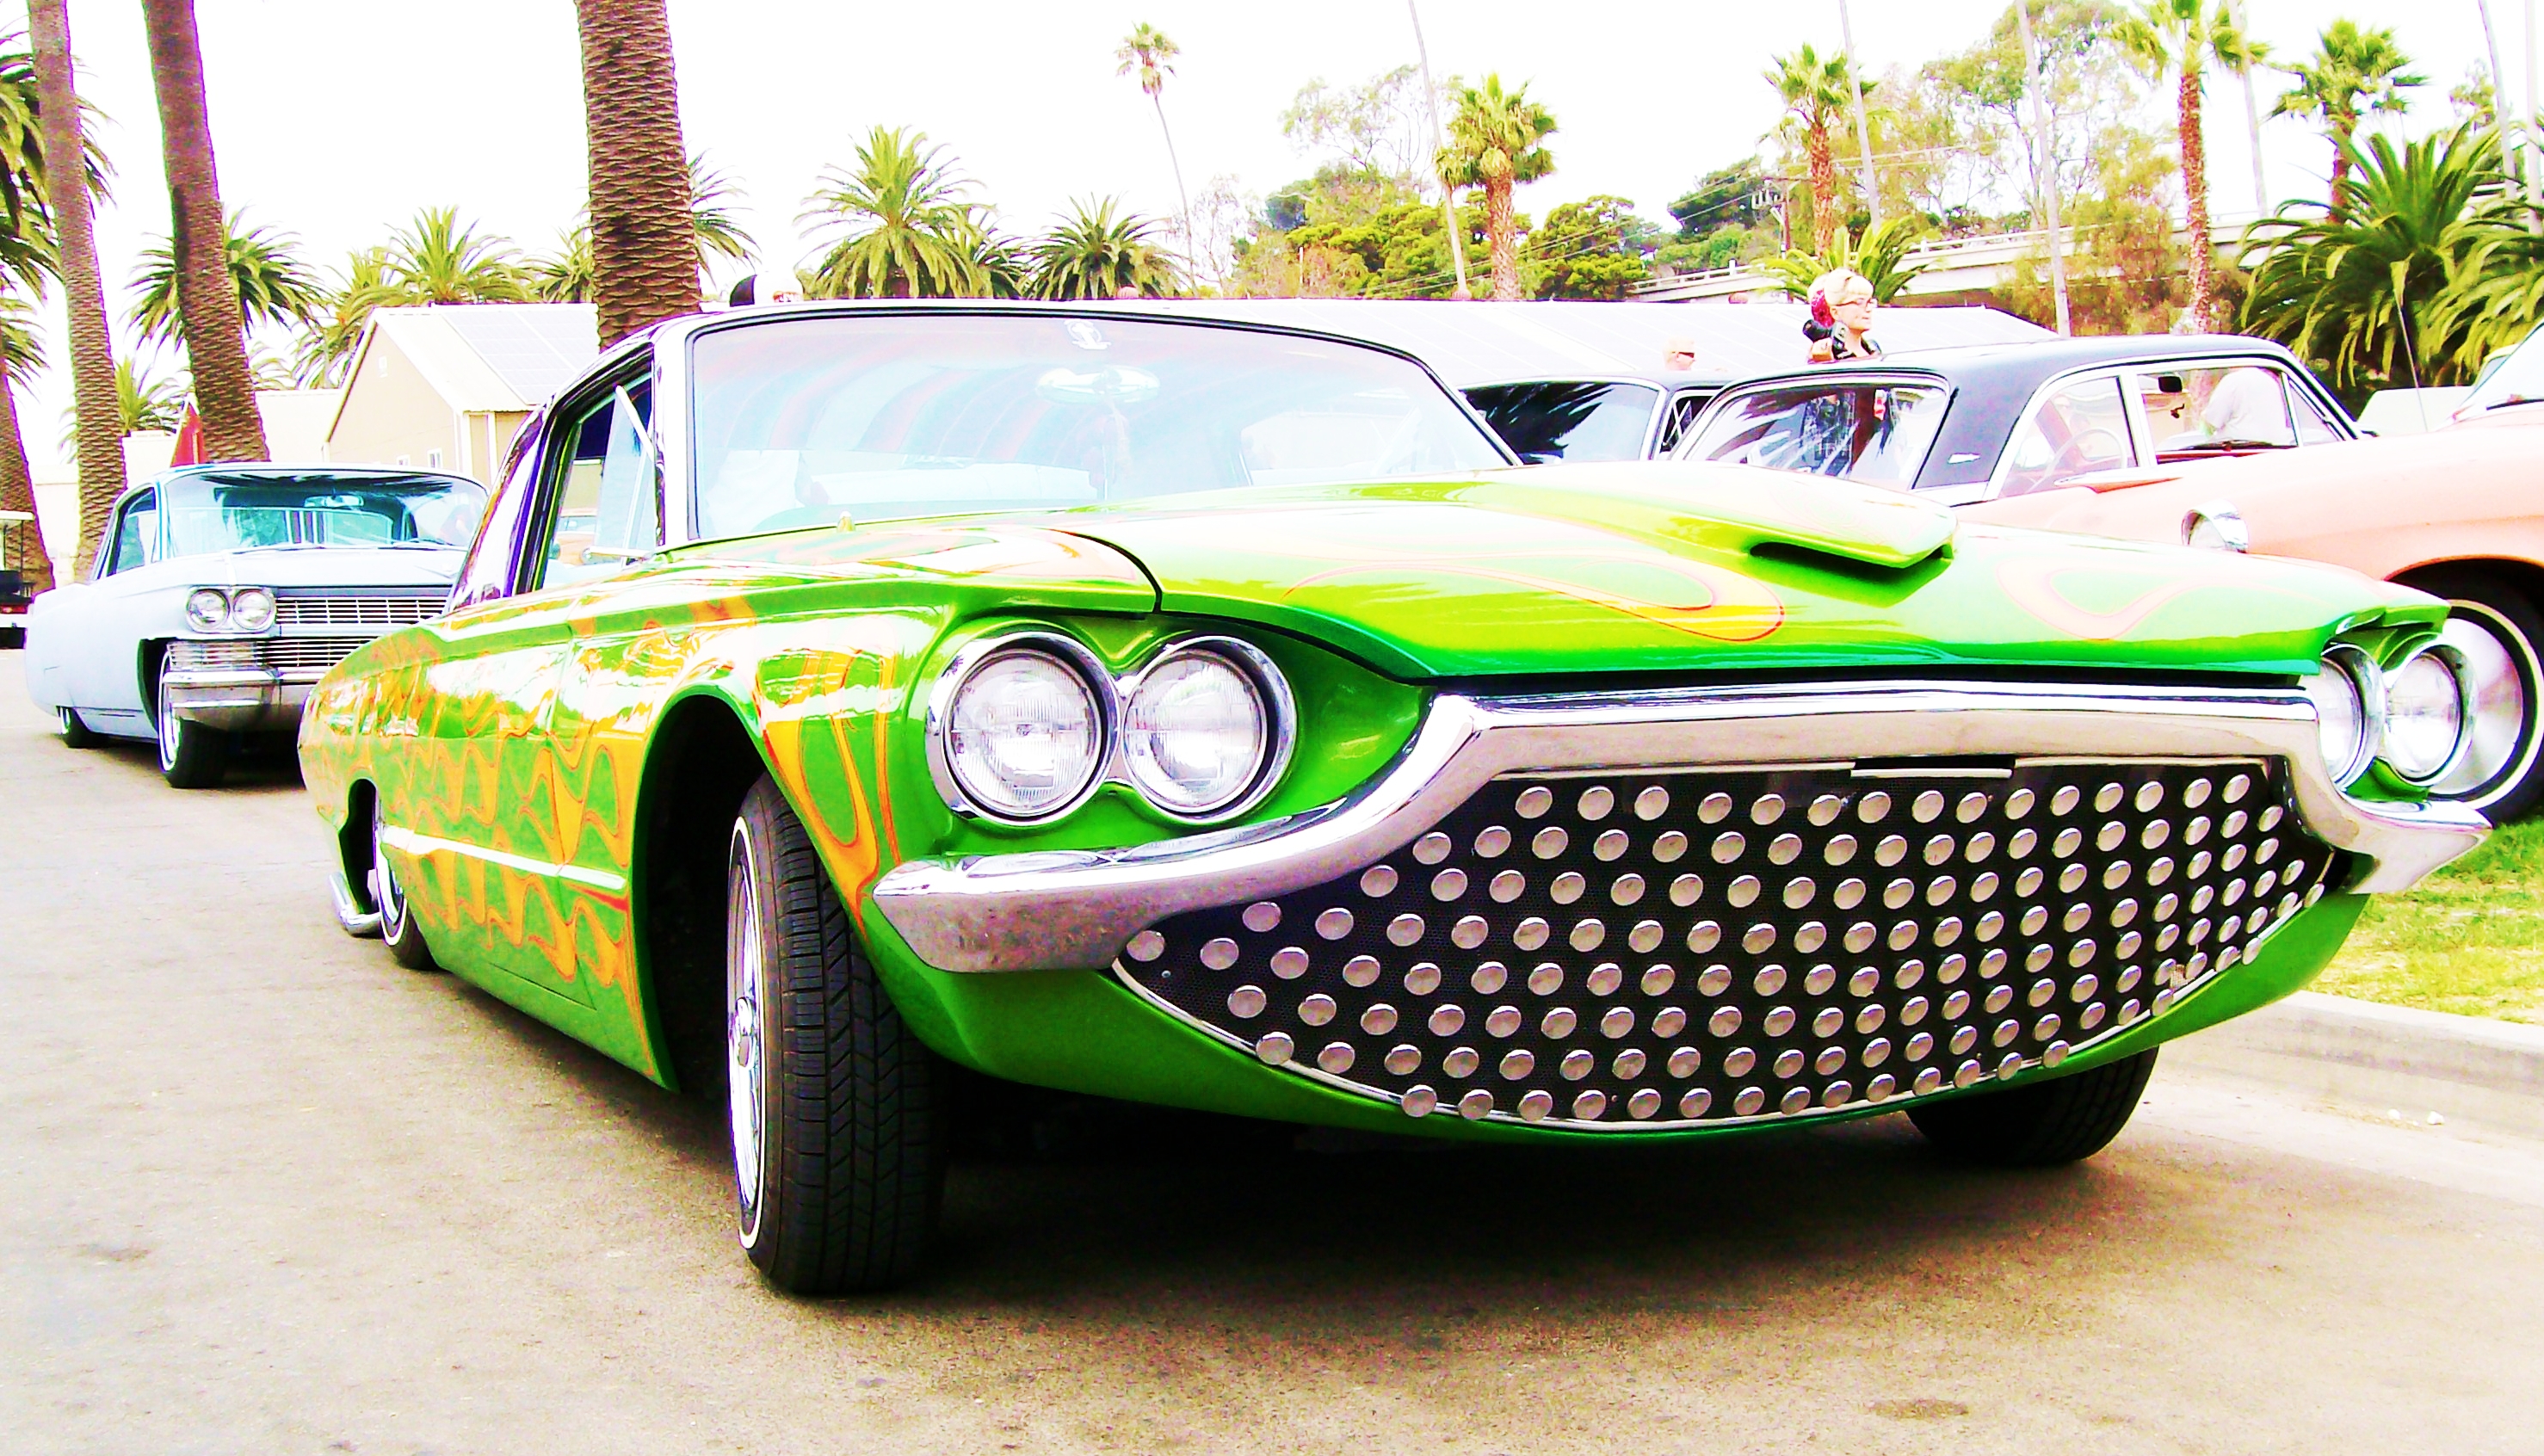 Old car car or new car? This wild custom was a oneman job by E Dog 